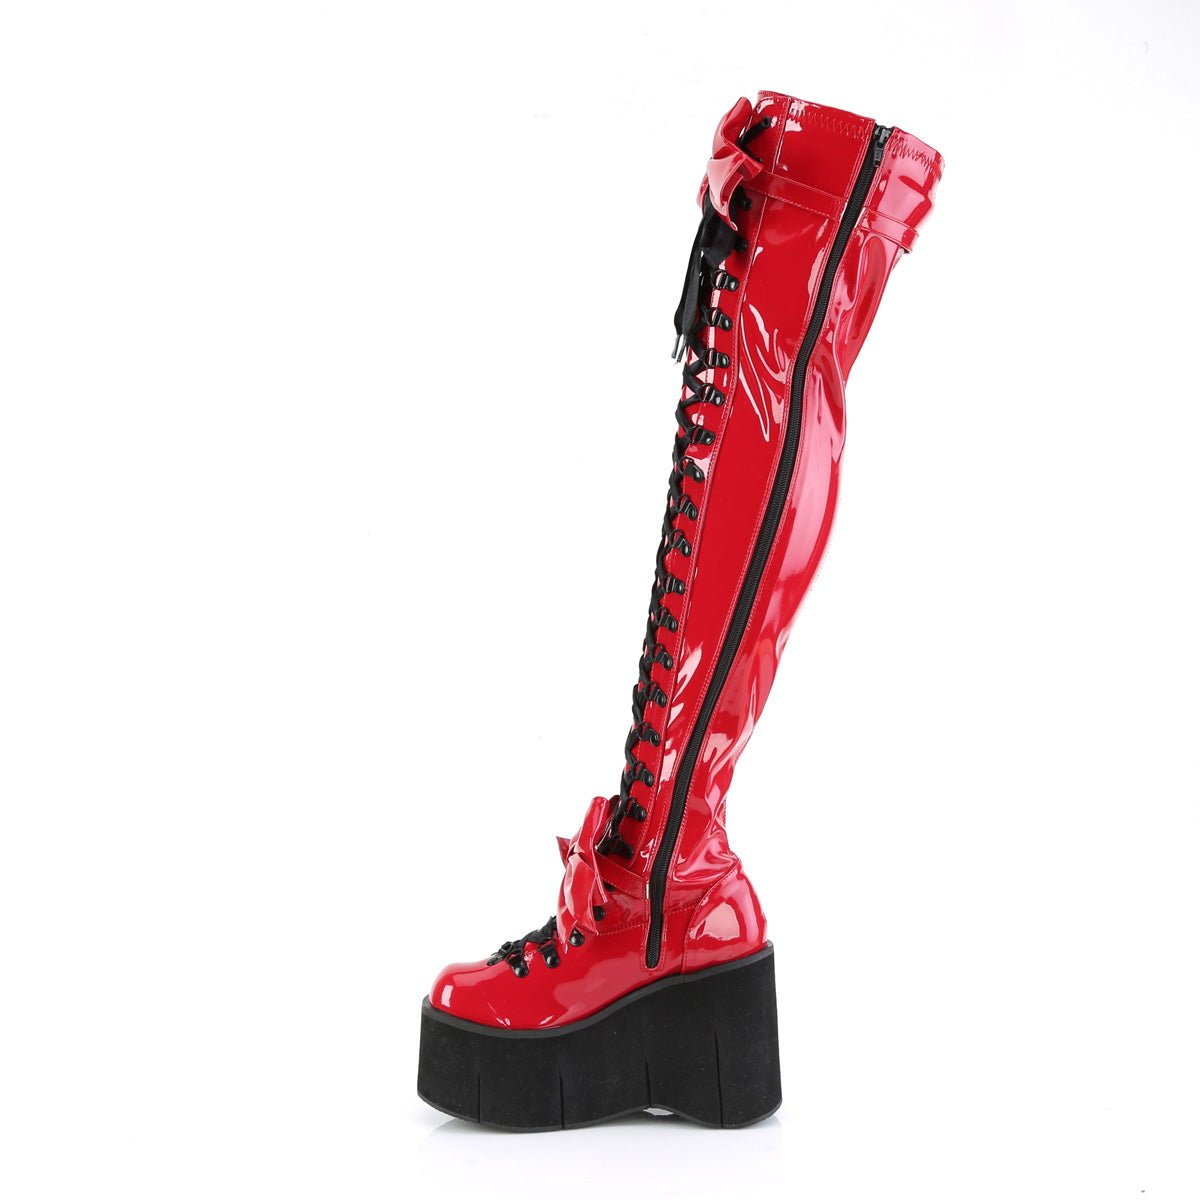 Too Fast | Demonia Kera 303 | Red Patent Leather Women's Over The Knee Boots